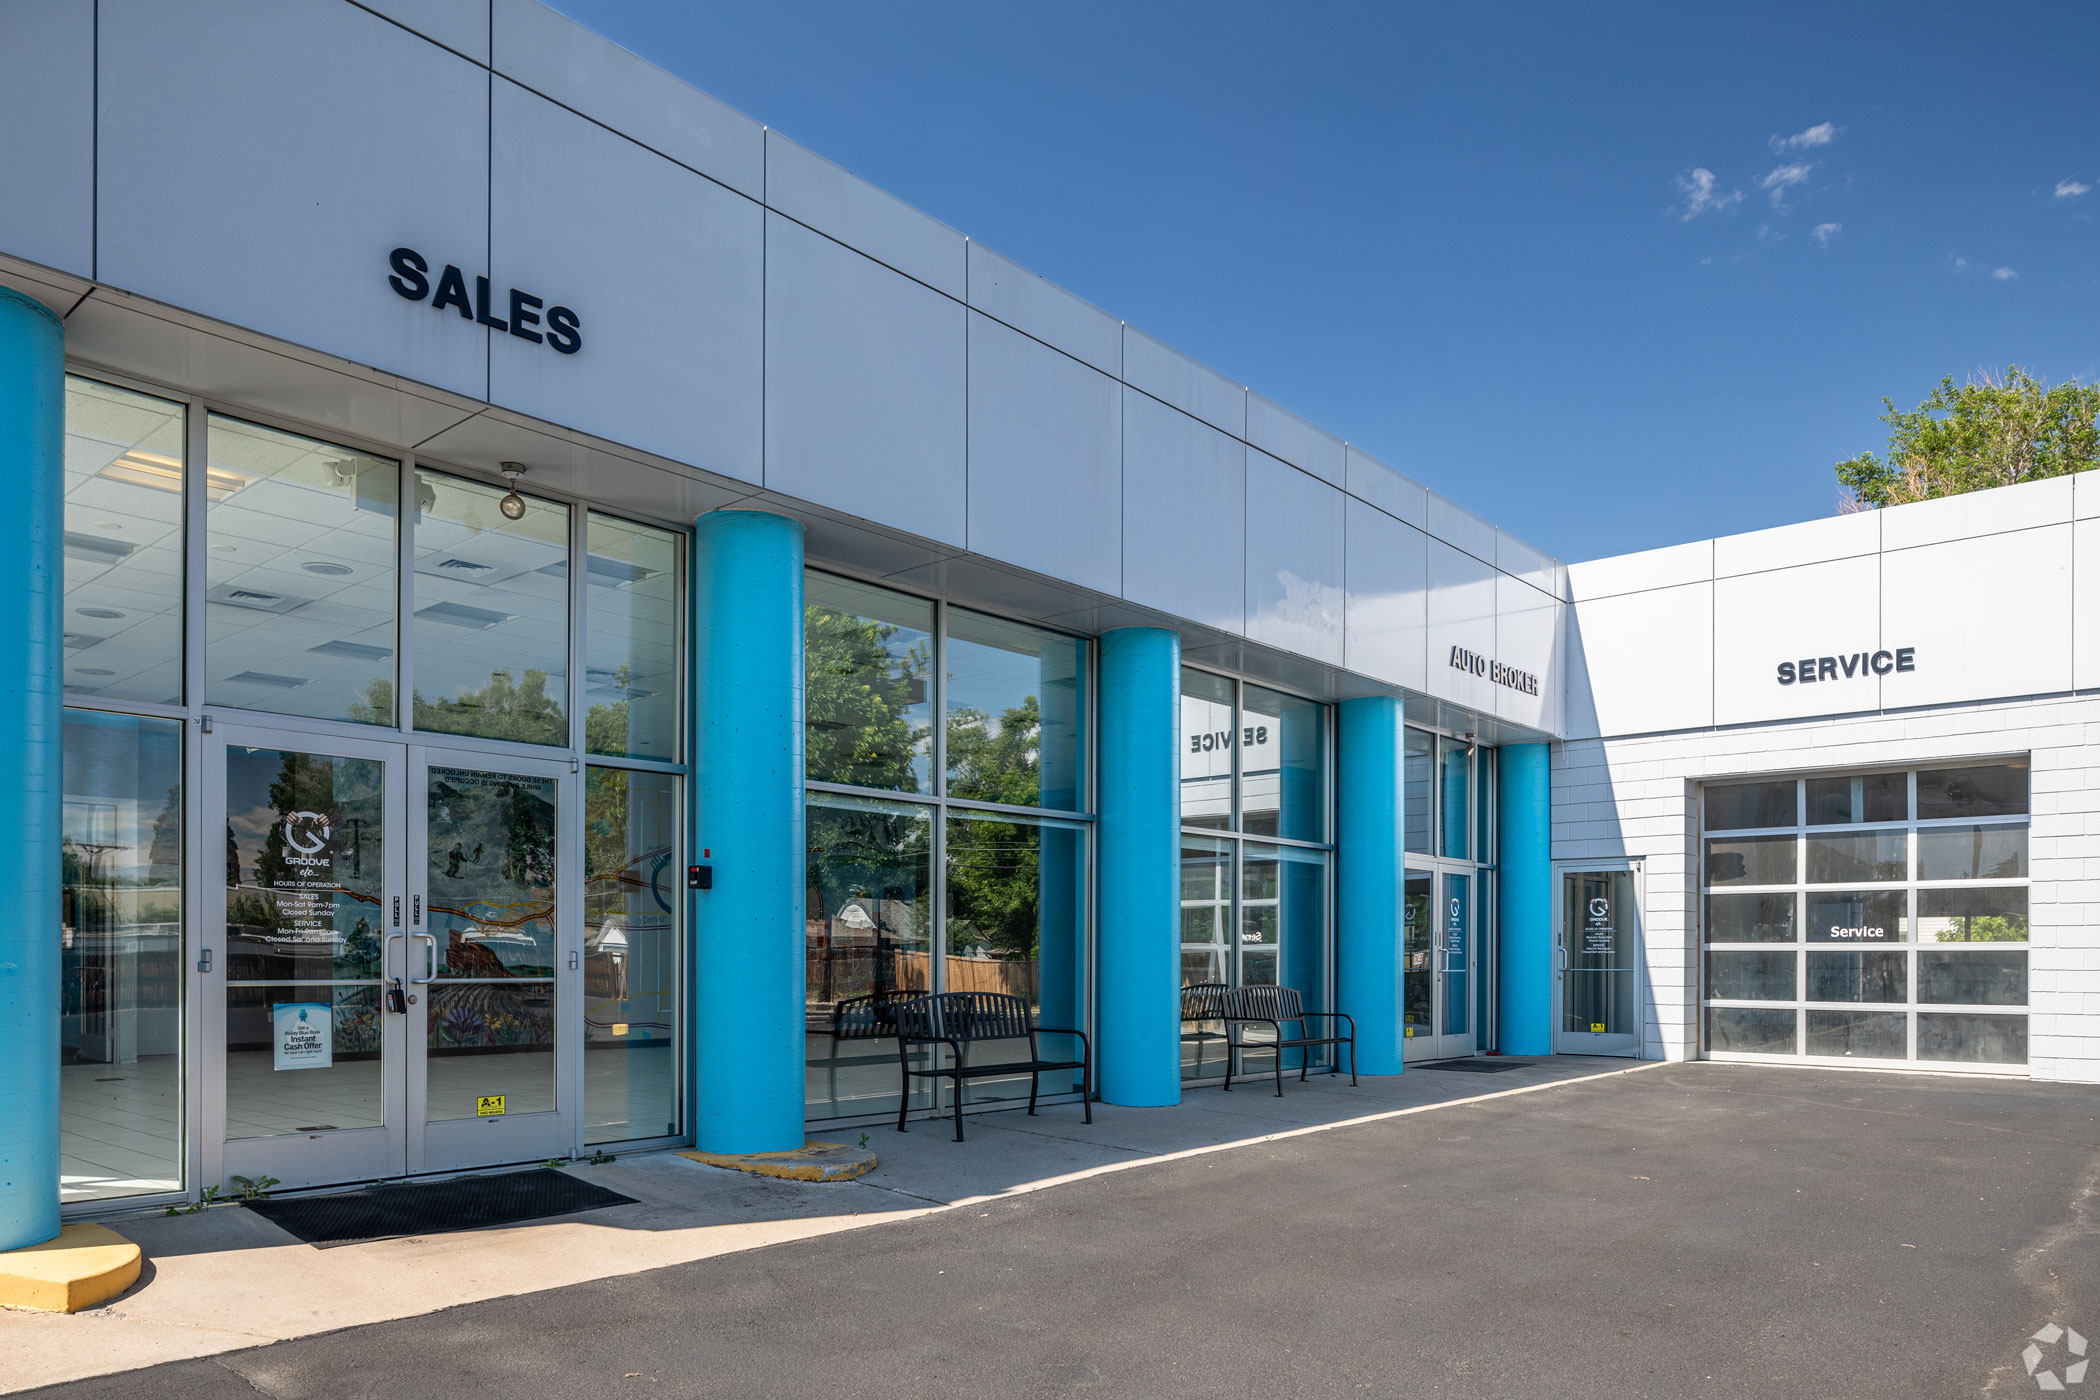 5 Year Lease Executed on South Broadway Automotive Retail Space